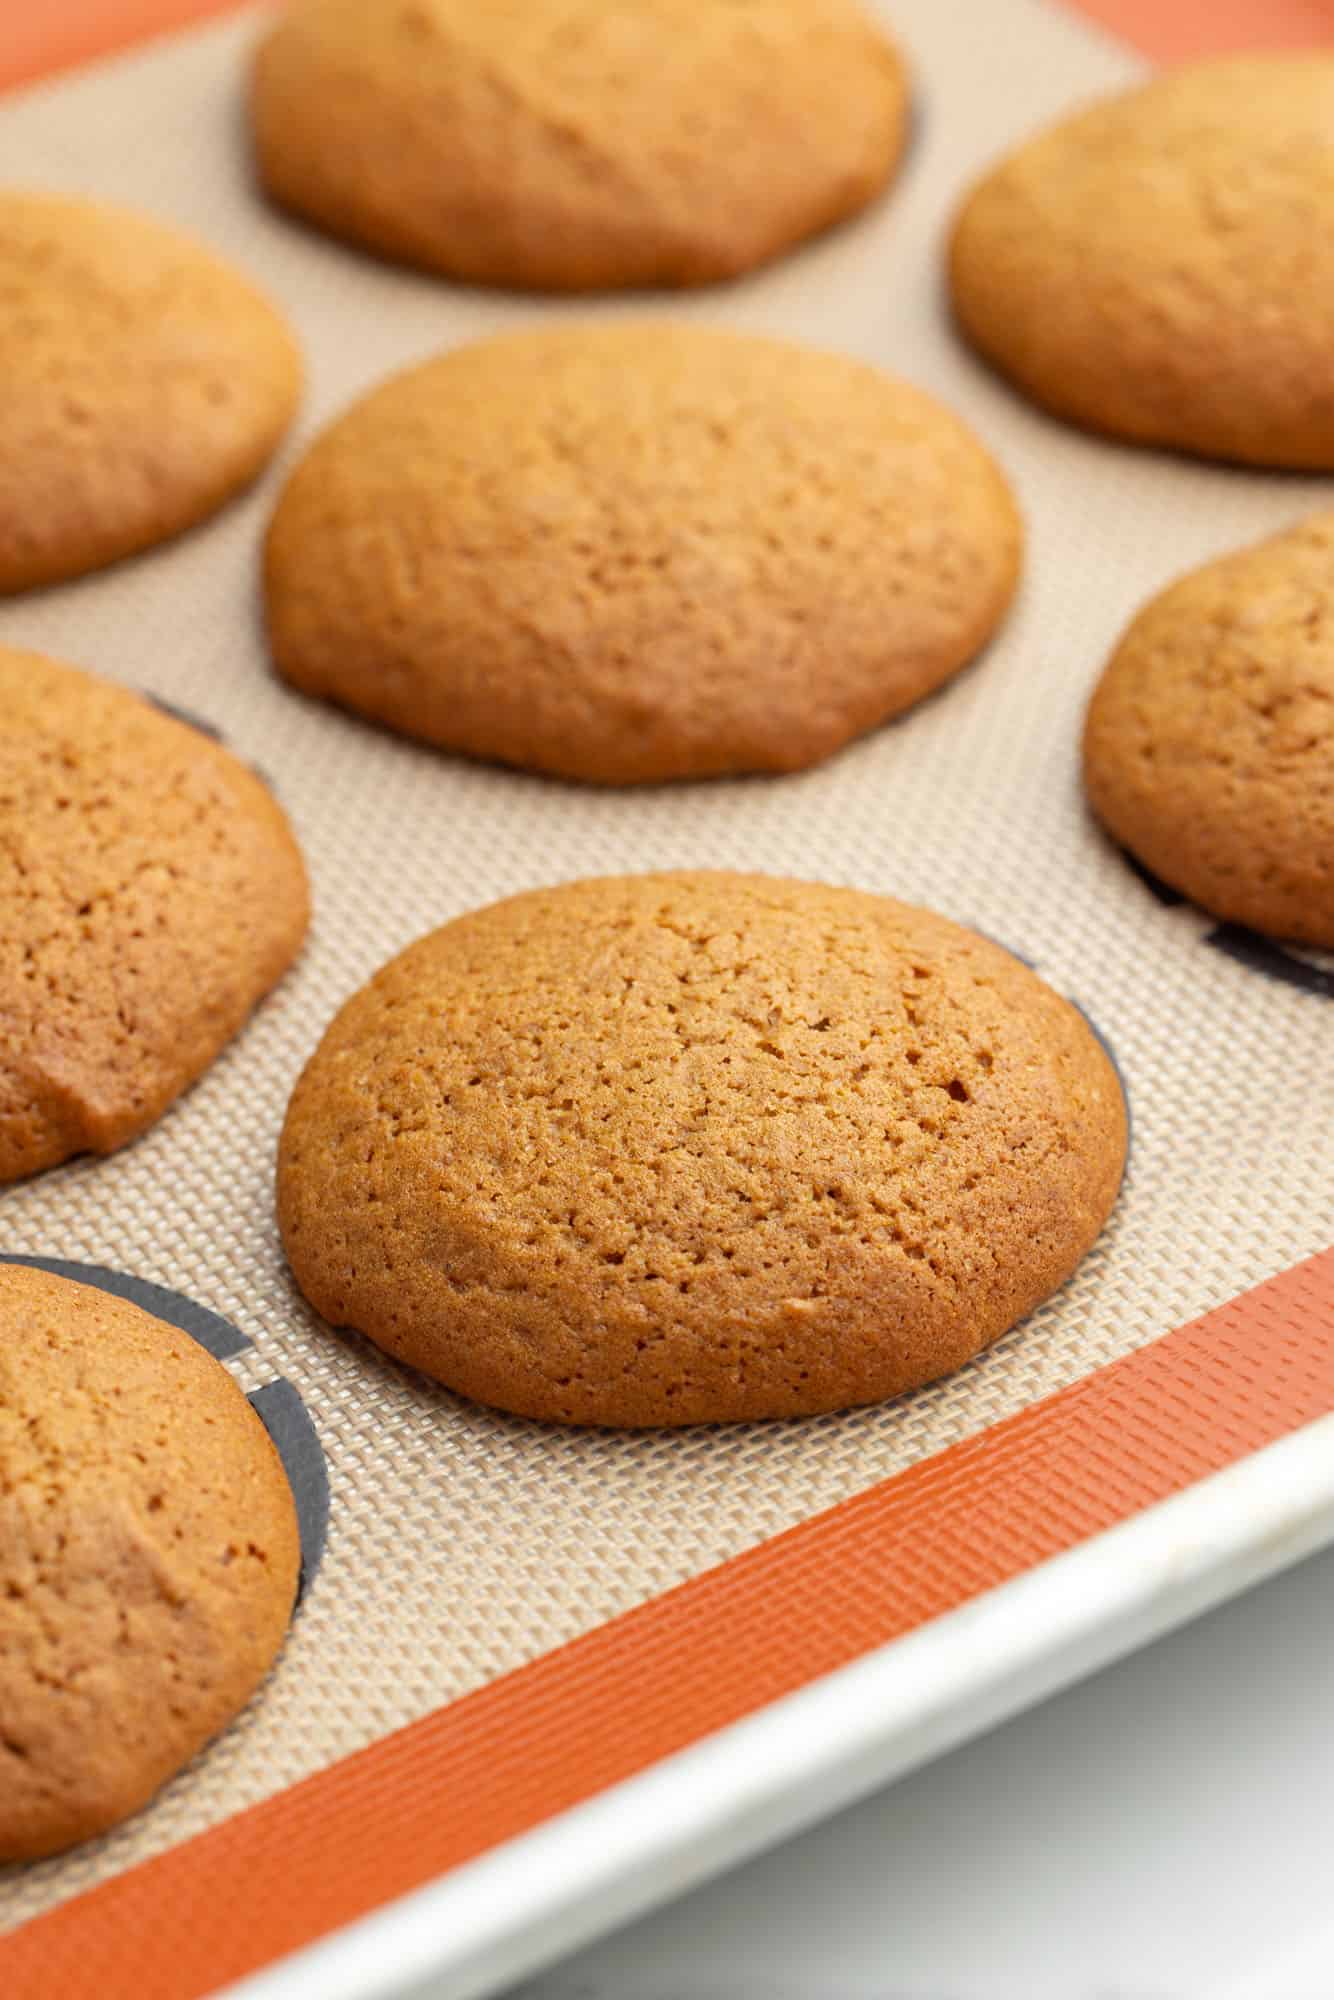 baked gingerbread whoopie pies on a baking sheet.